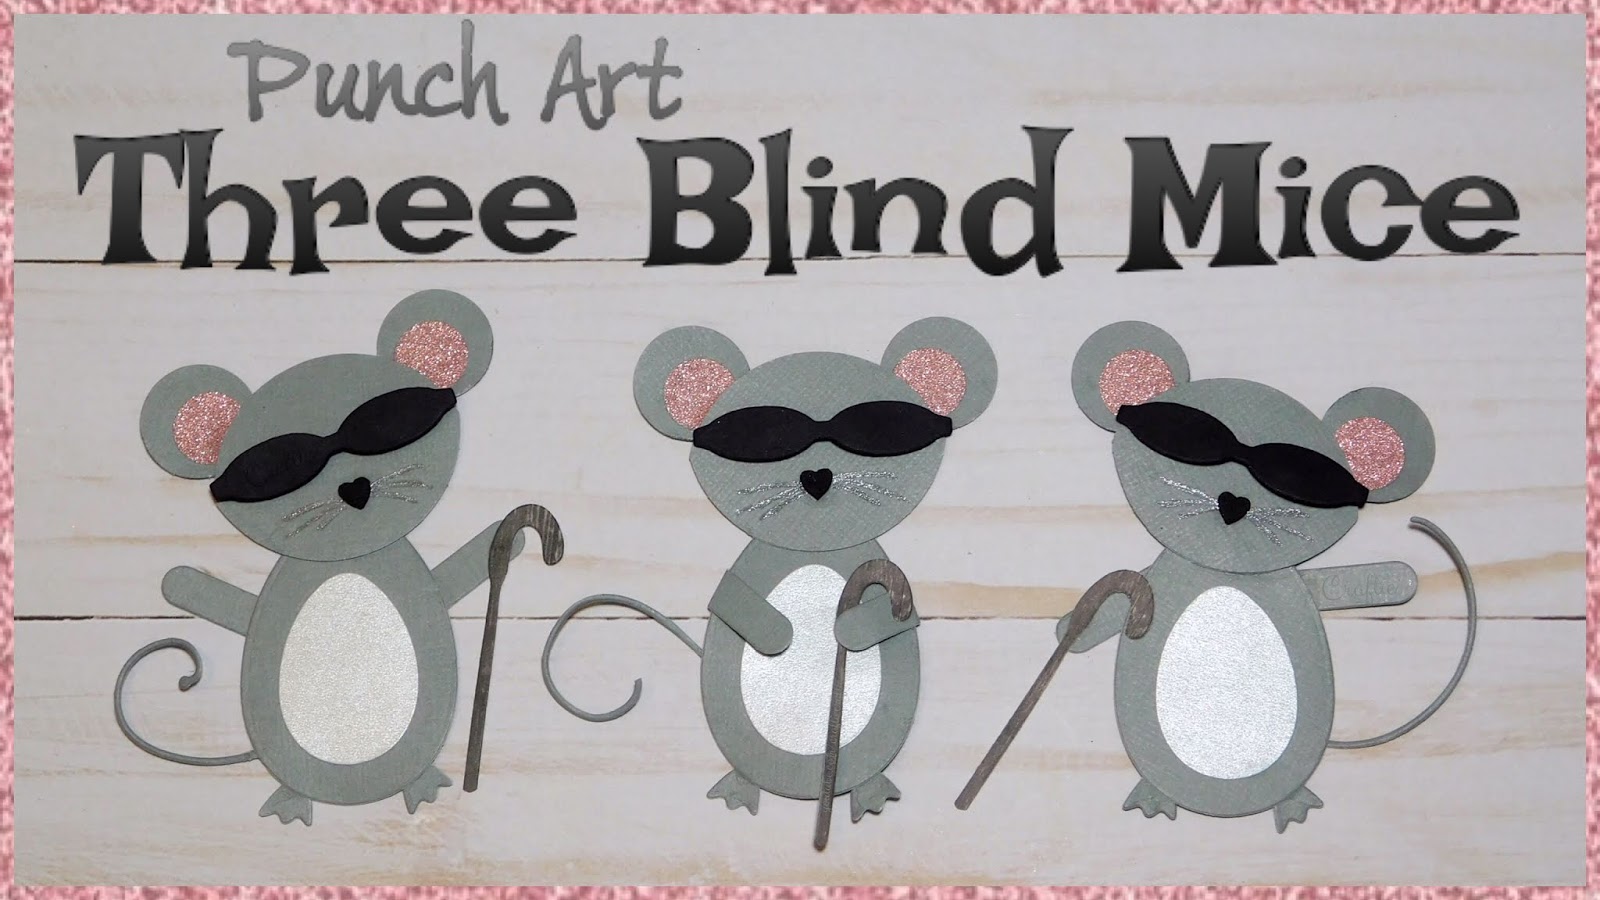 Three mice. Punch Mouse. Blind Mouse Art.